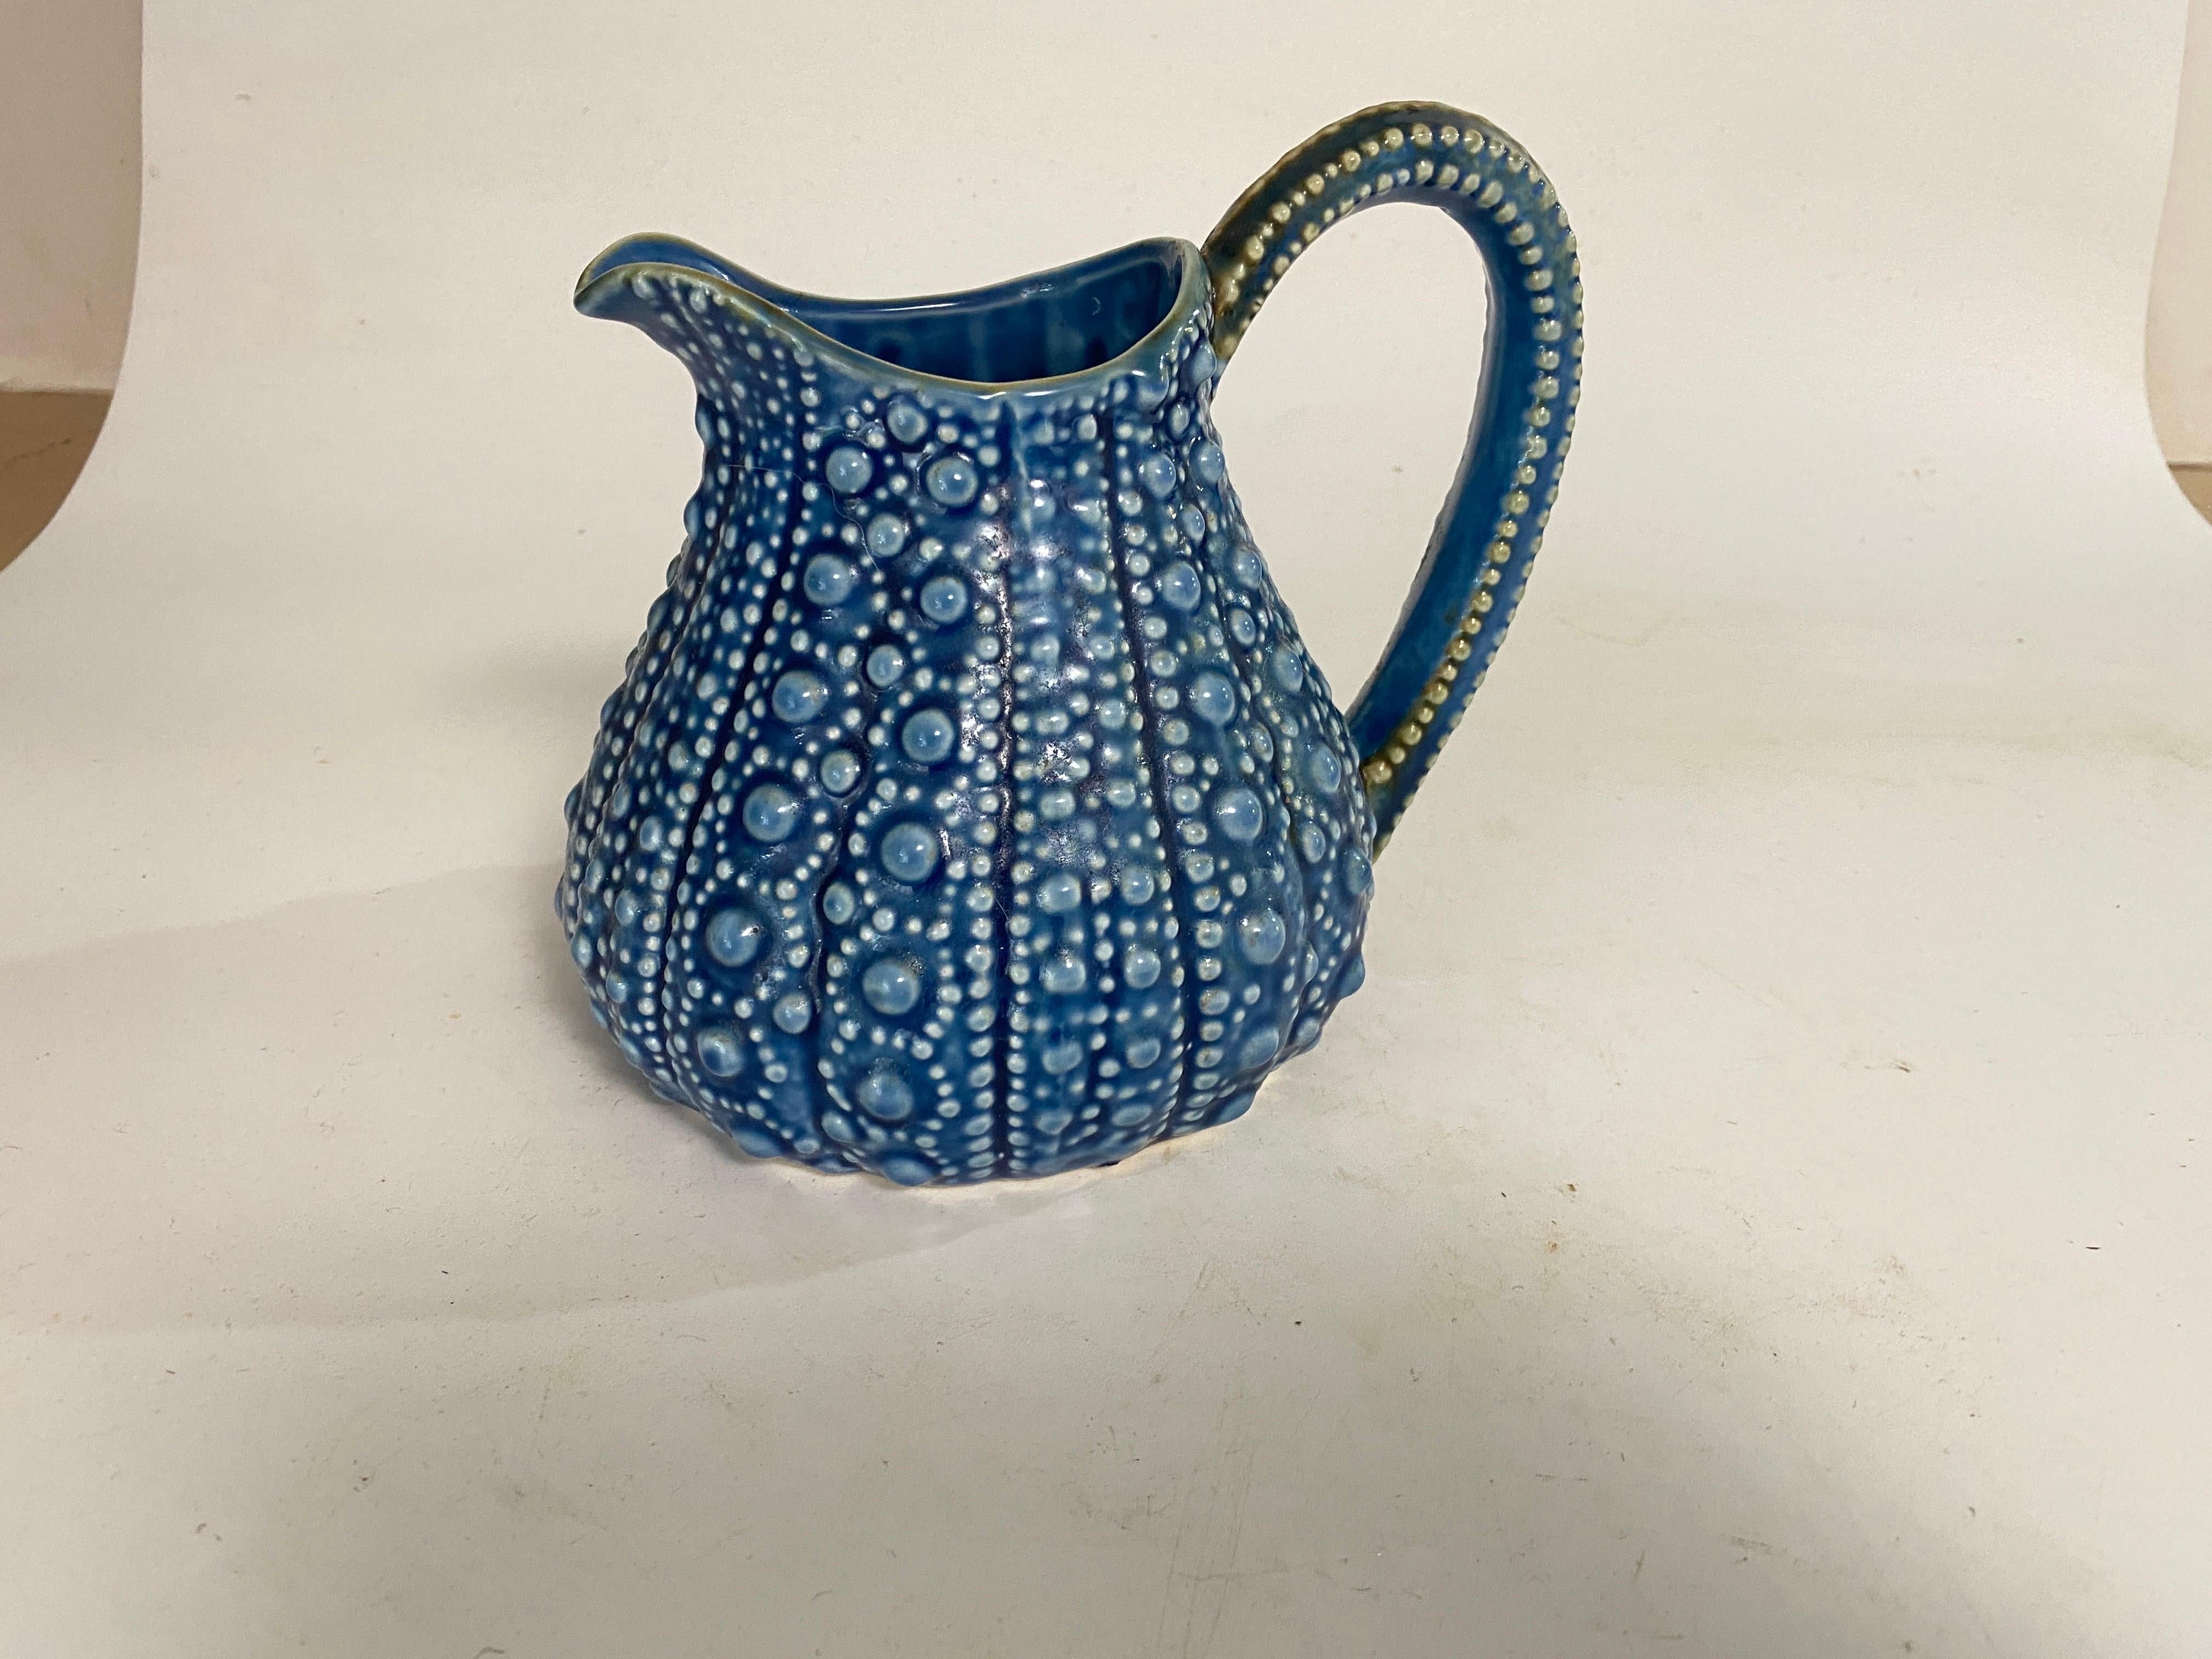 Enameled Majolica Pitcher or Jug circa 1900 Blue and White Color France